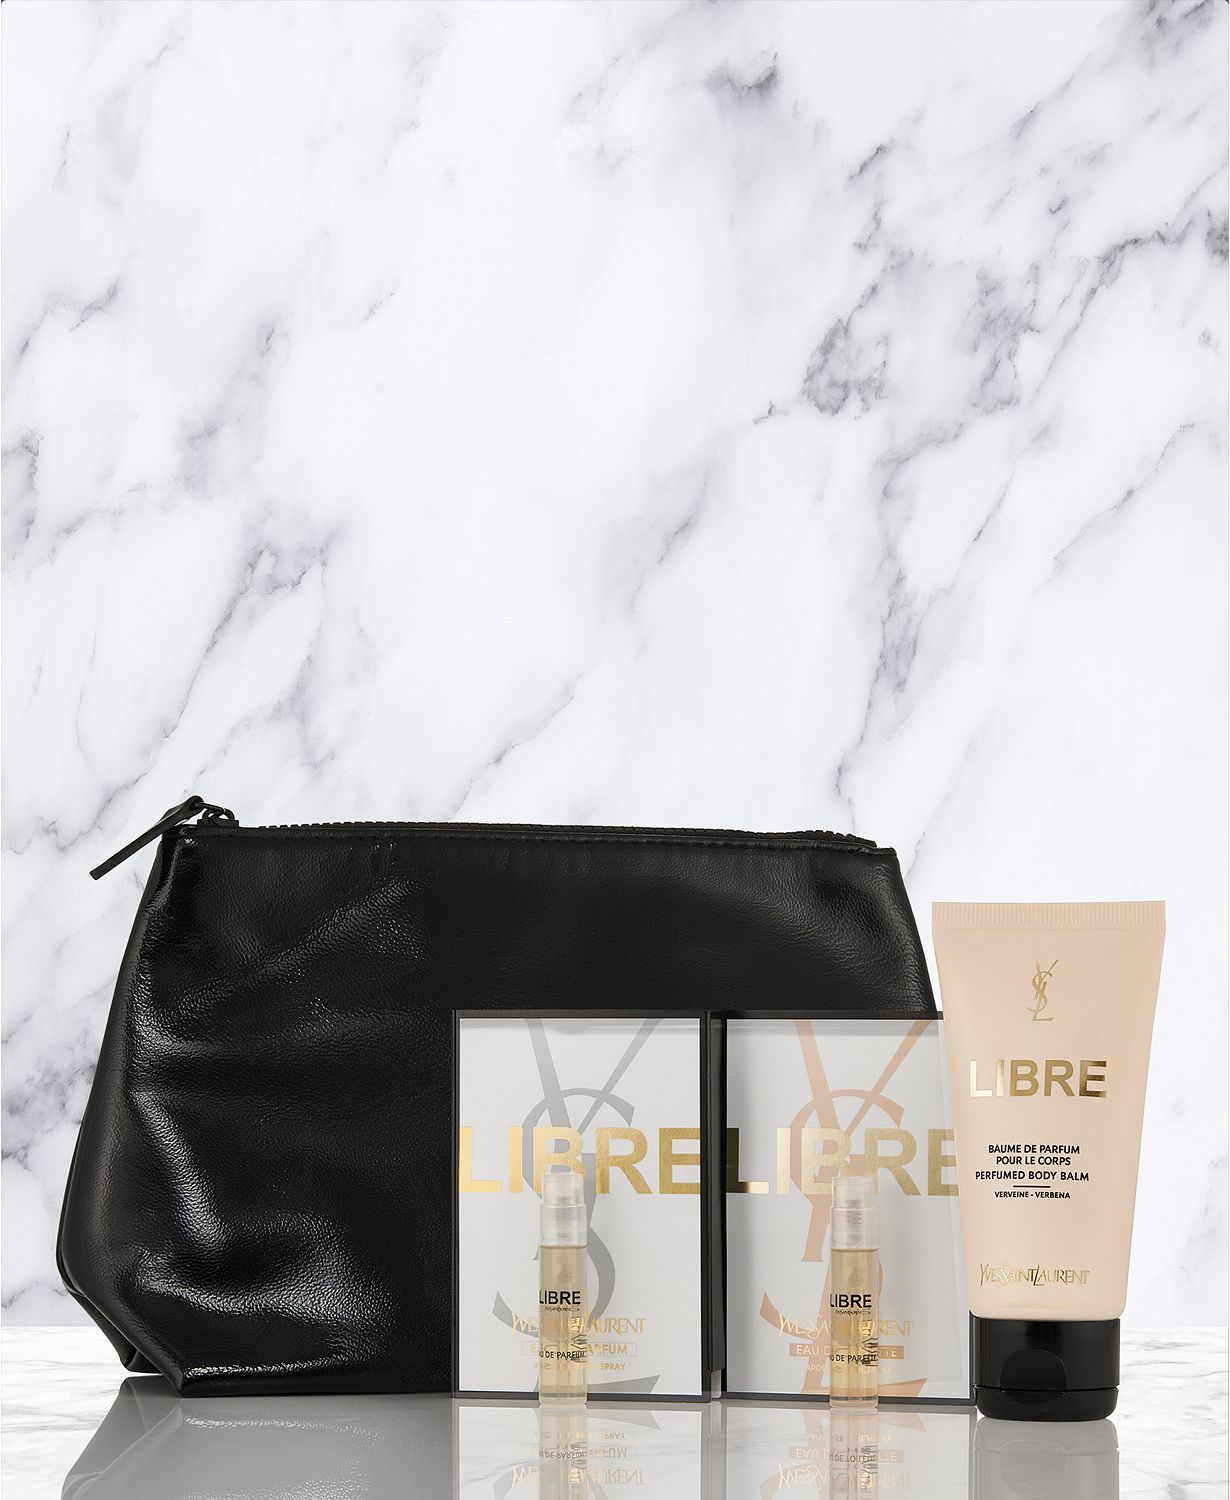 FREE 4-Pc. fragrance gift with $150 purchase from the Yves Saint Laurent Libre fragrance collection